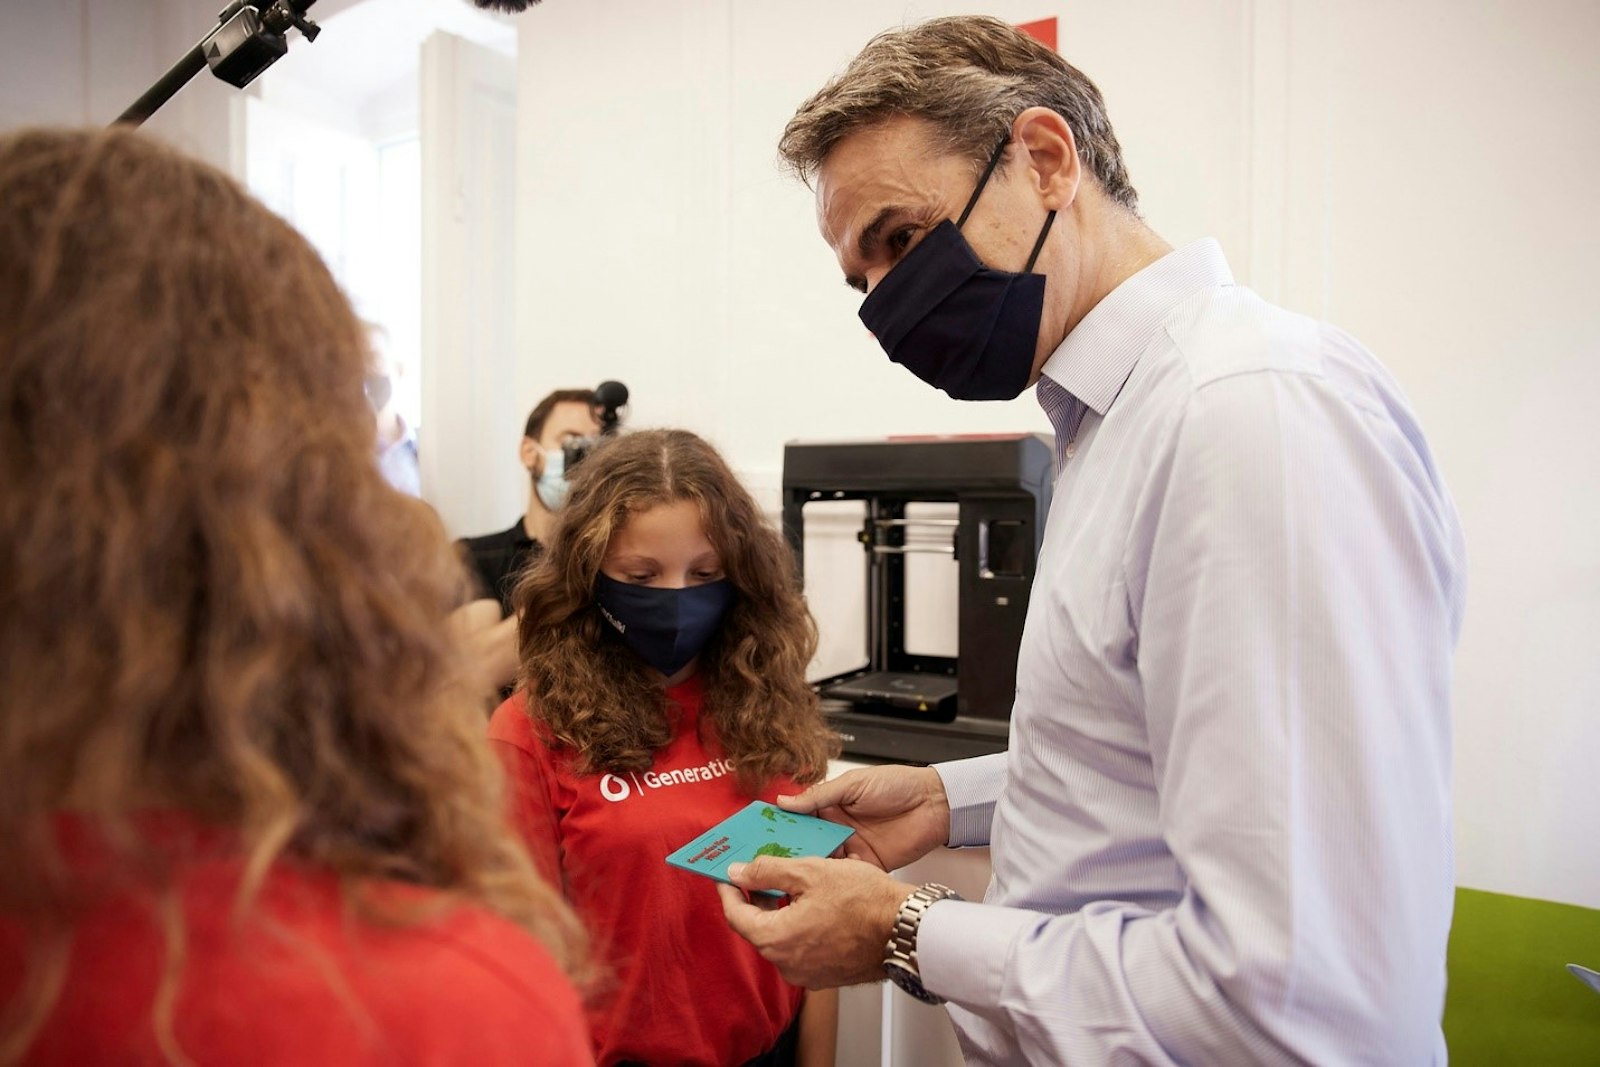 Greece’s Prime Minister Kyriakos Mitsotakis meets students from Vodafone’s Generation Next programme